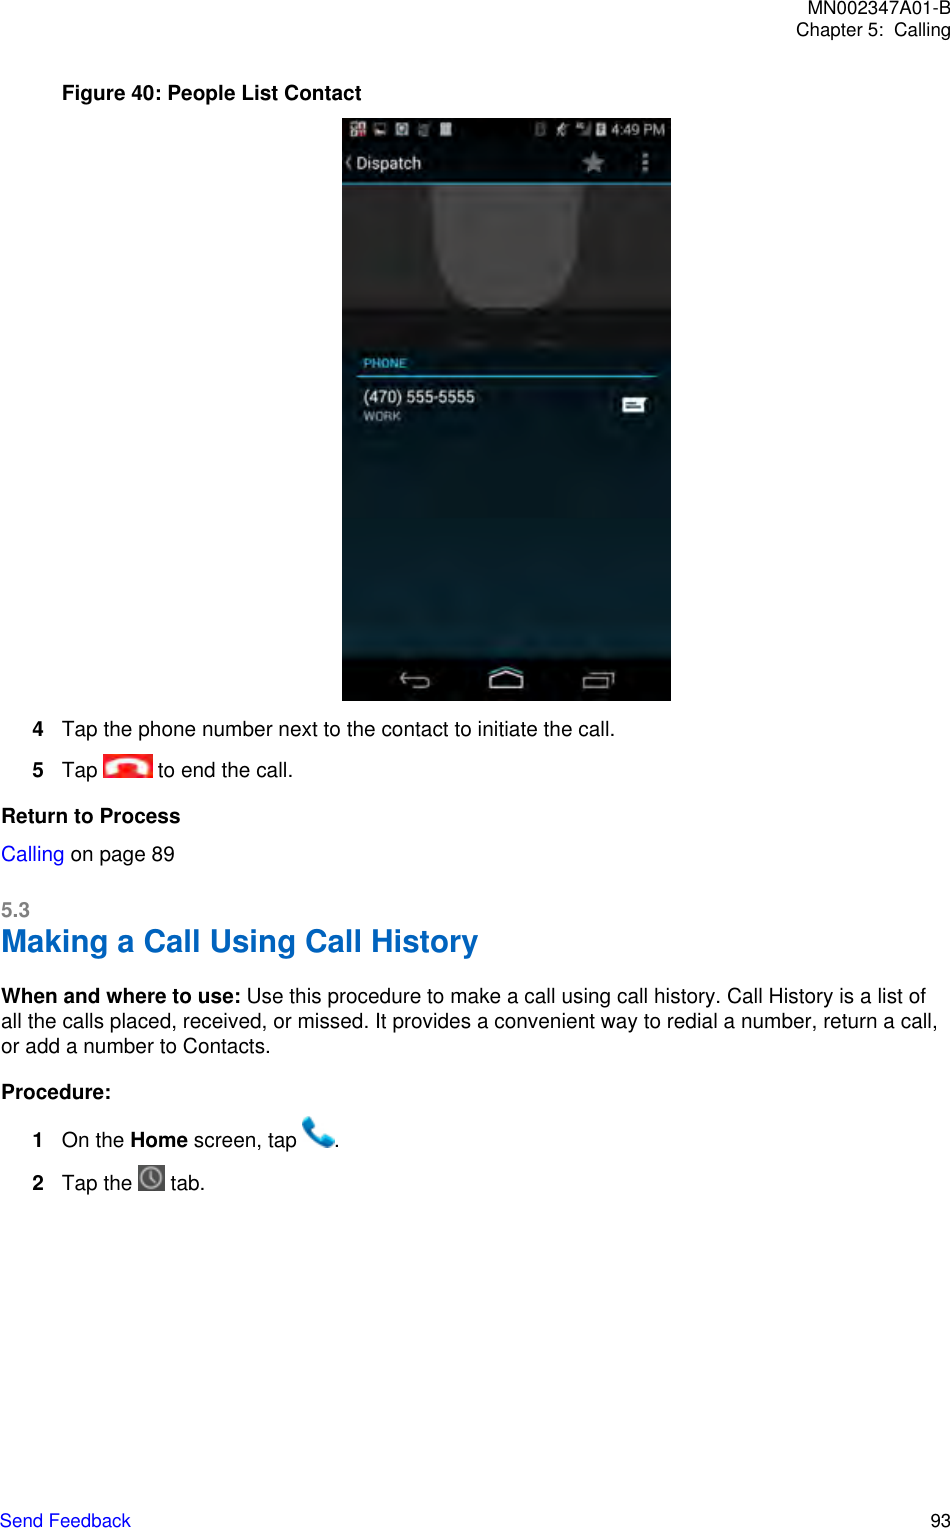 Figure 40: People List Contact4Tap the phone number next to the contact to initiate the call.5Tap   to end the call.Return to ProcessCalling on page 895.3Making a Call Using Call HistoryWhen and where to use: Use this procedure to make a call using call history. Call History is a list ofall the calls placed, received, or missed. It provides a convenient way to redial a number, return a call,or add a number to Contacts.Procedure:1On the Home screen, tap  .2Tap the   tab.MN002347A01-BChapter 5:  CallingSend Feedback   93